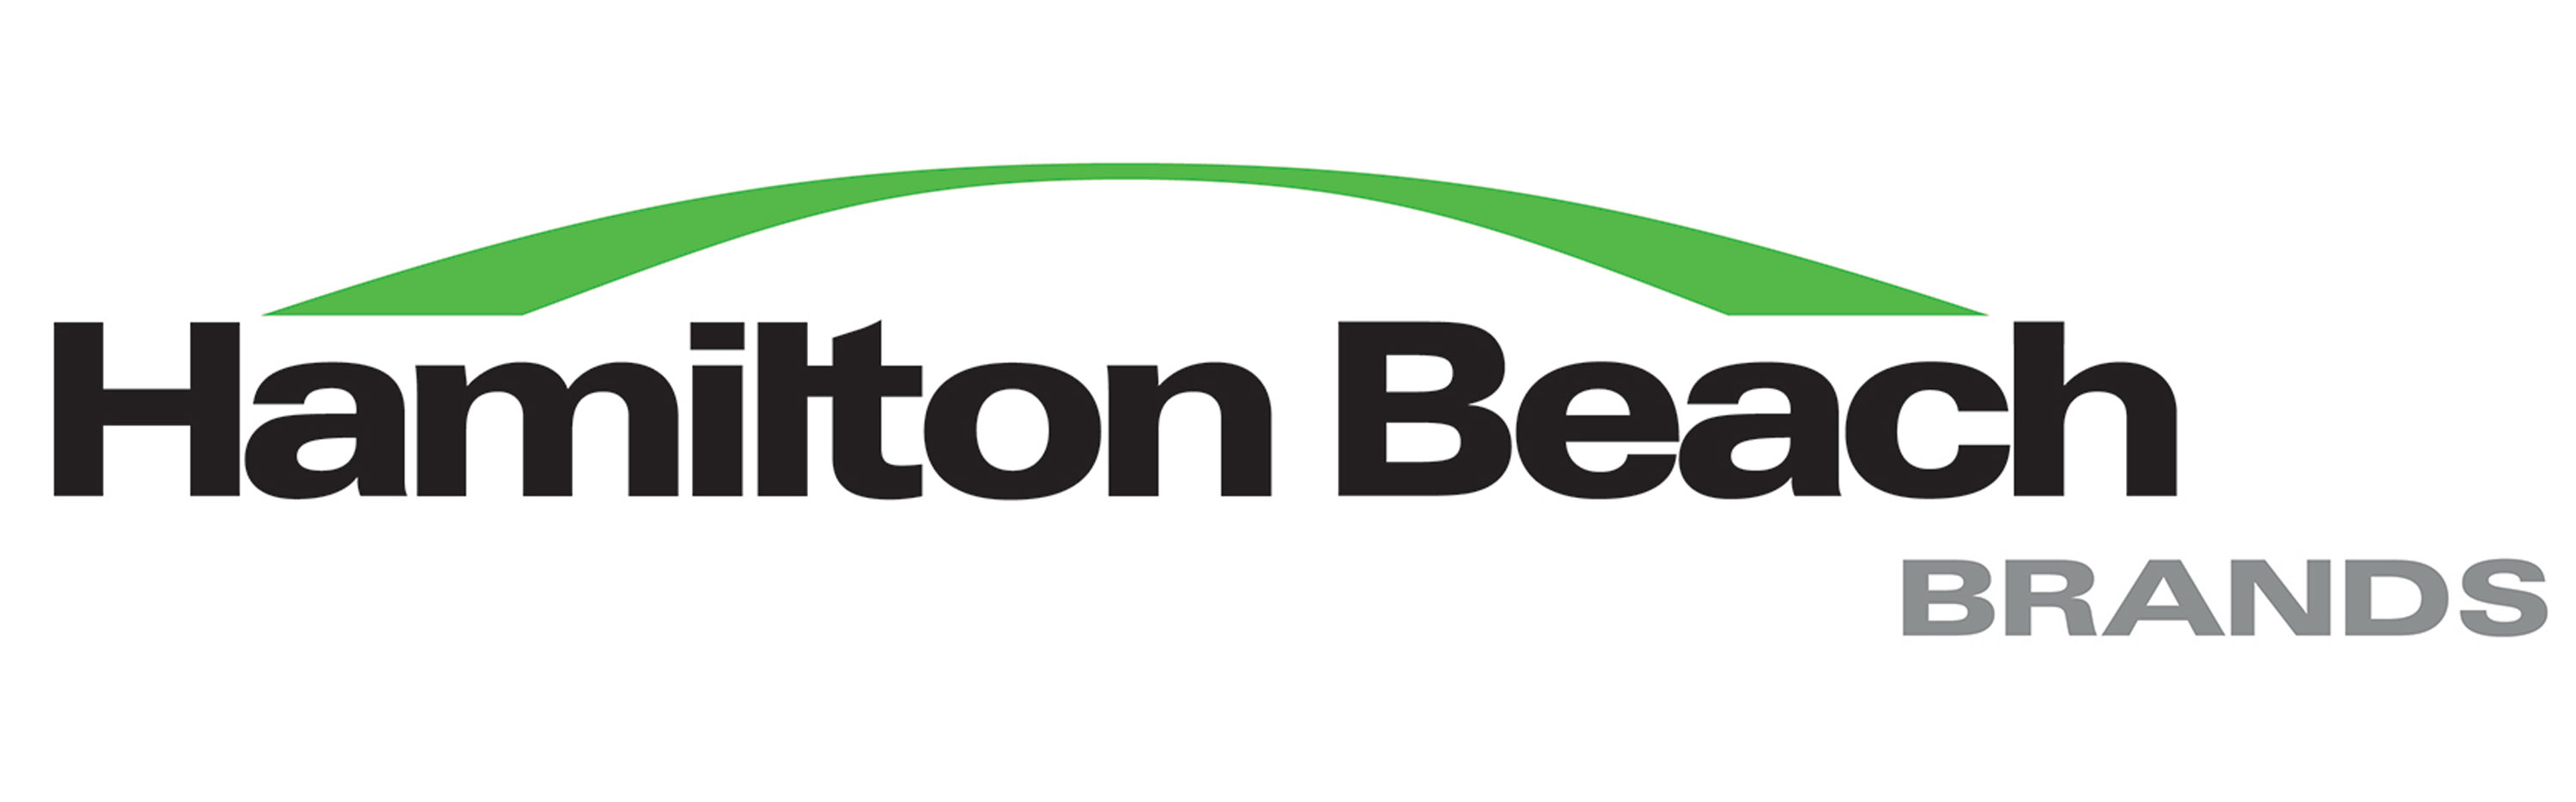 Hamilton Beach Brands logo with black text and light green swoop above the letters